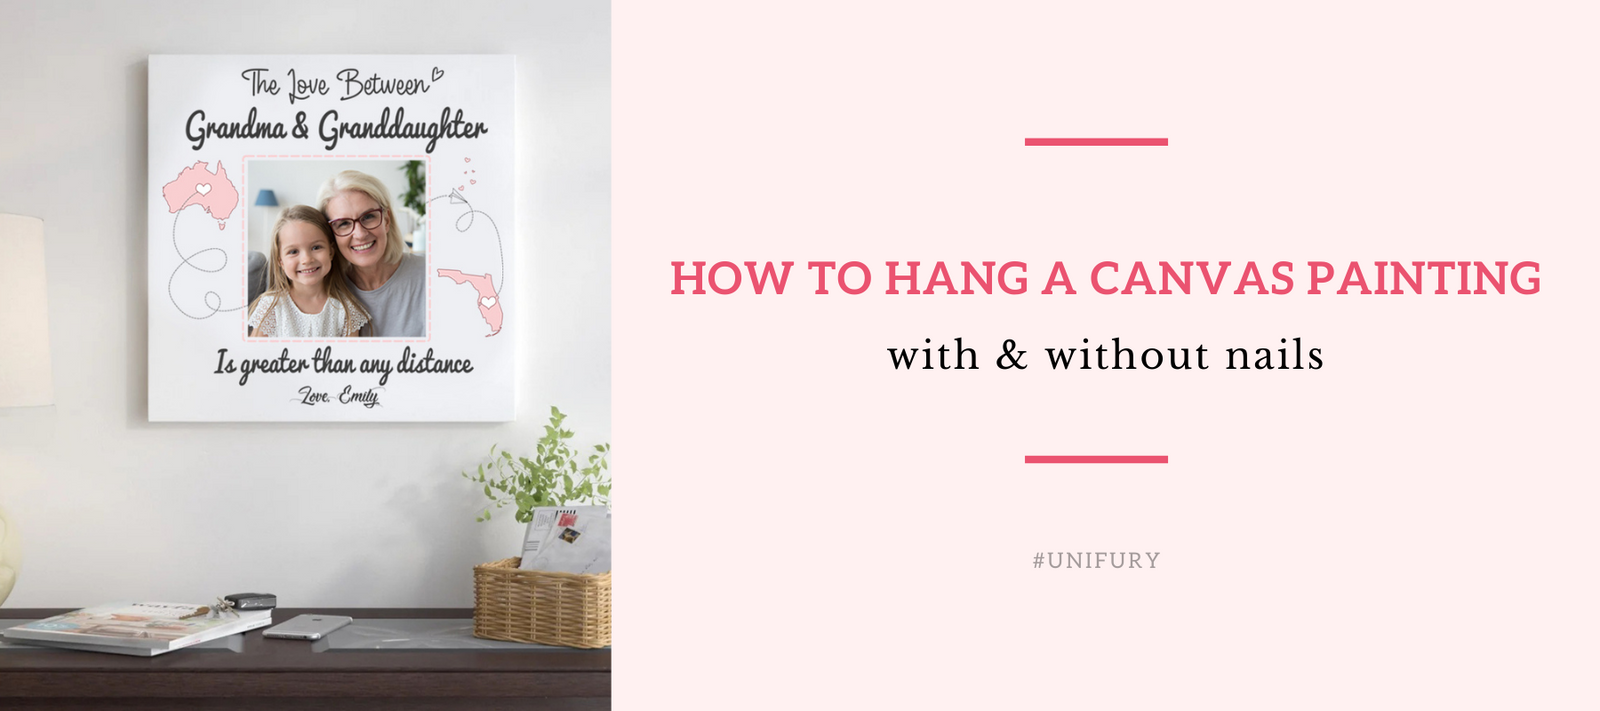 How To Hang A Canvas Painting With And Without Nails - Unifury